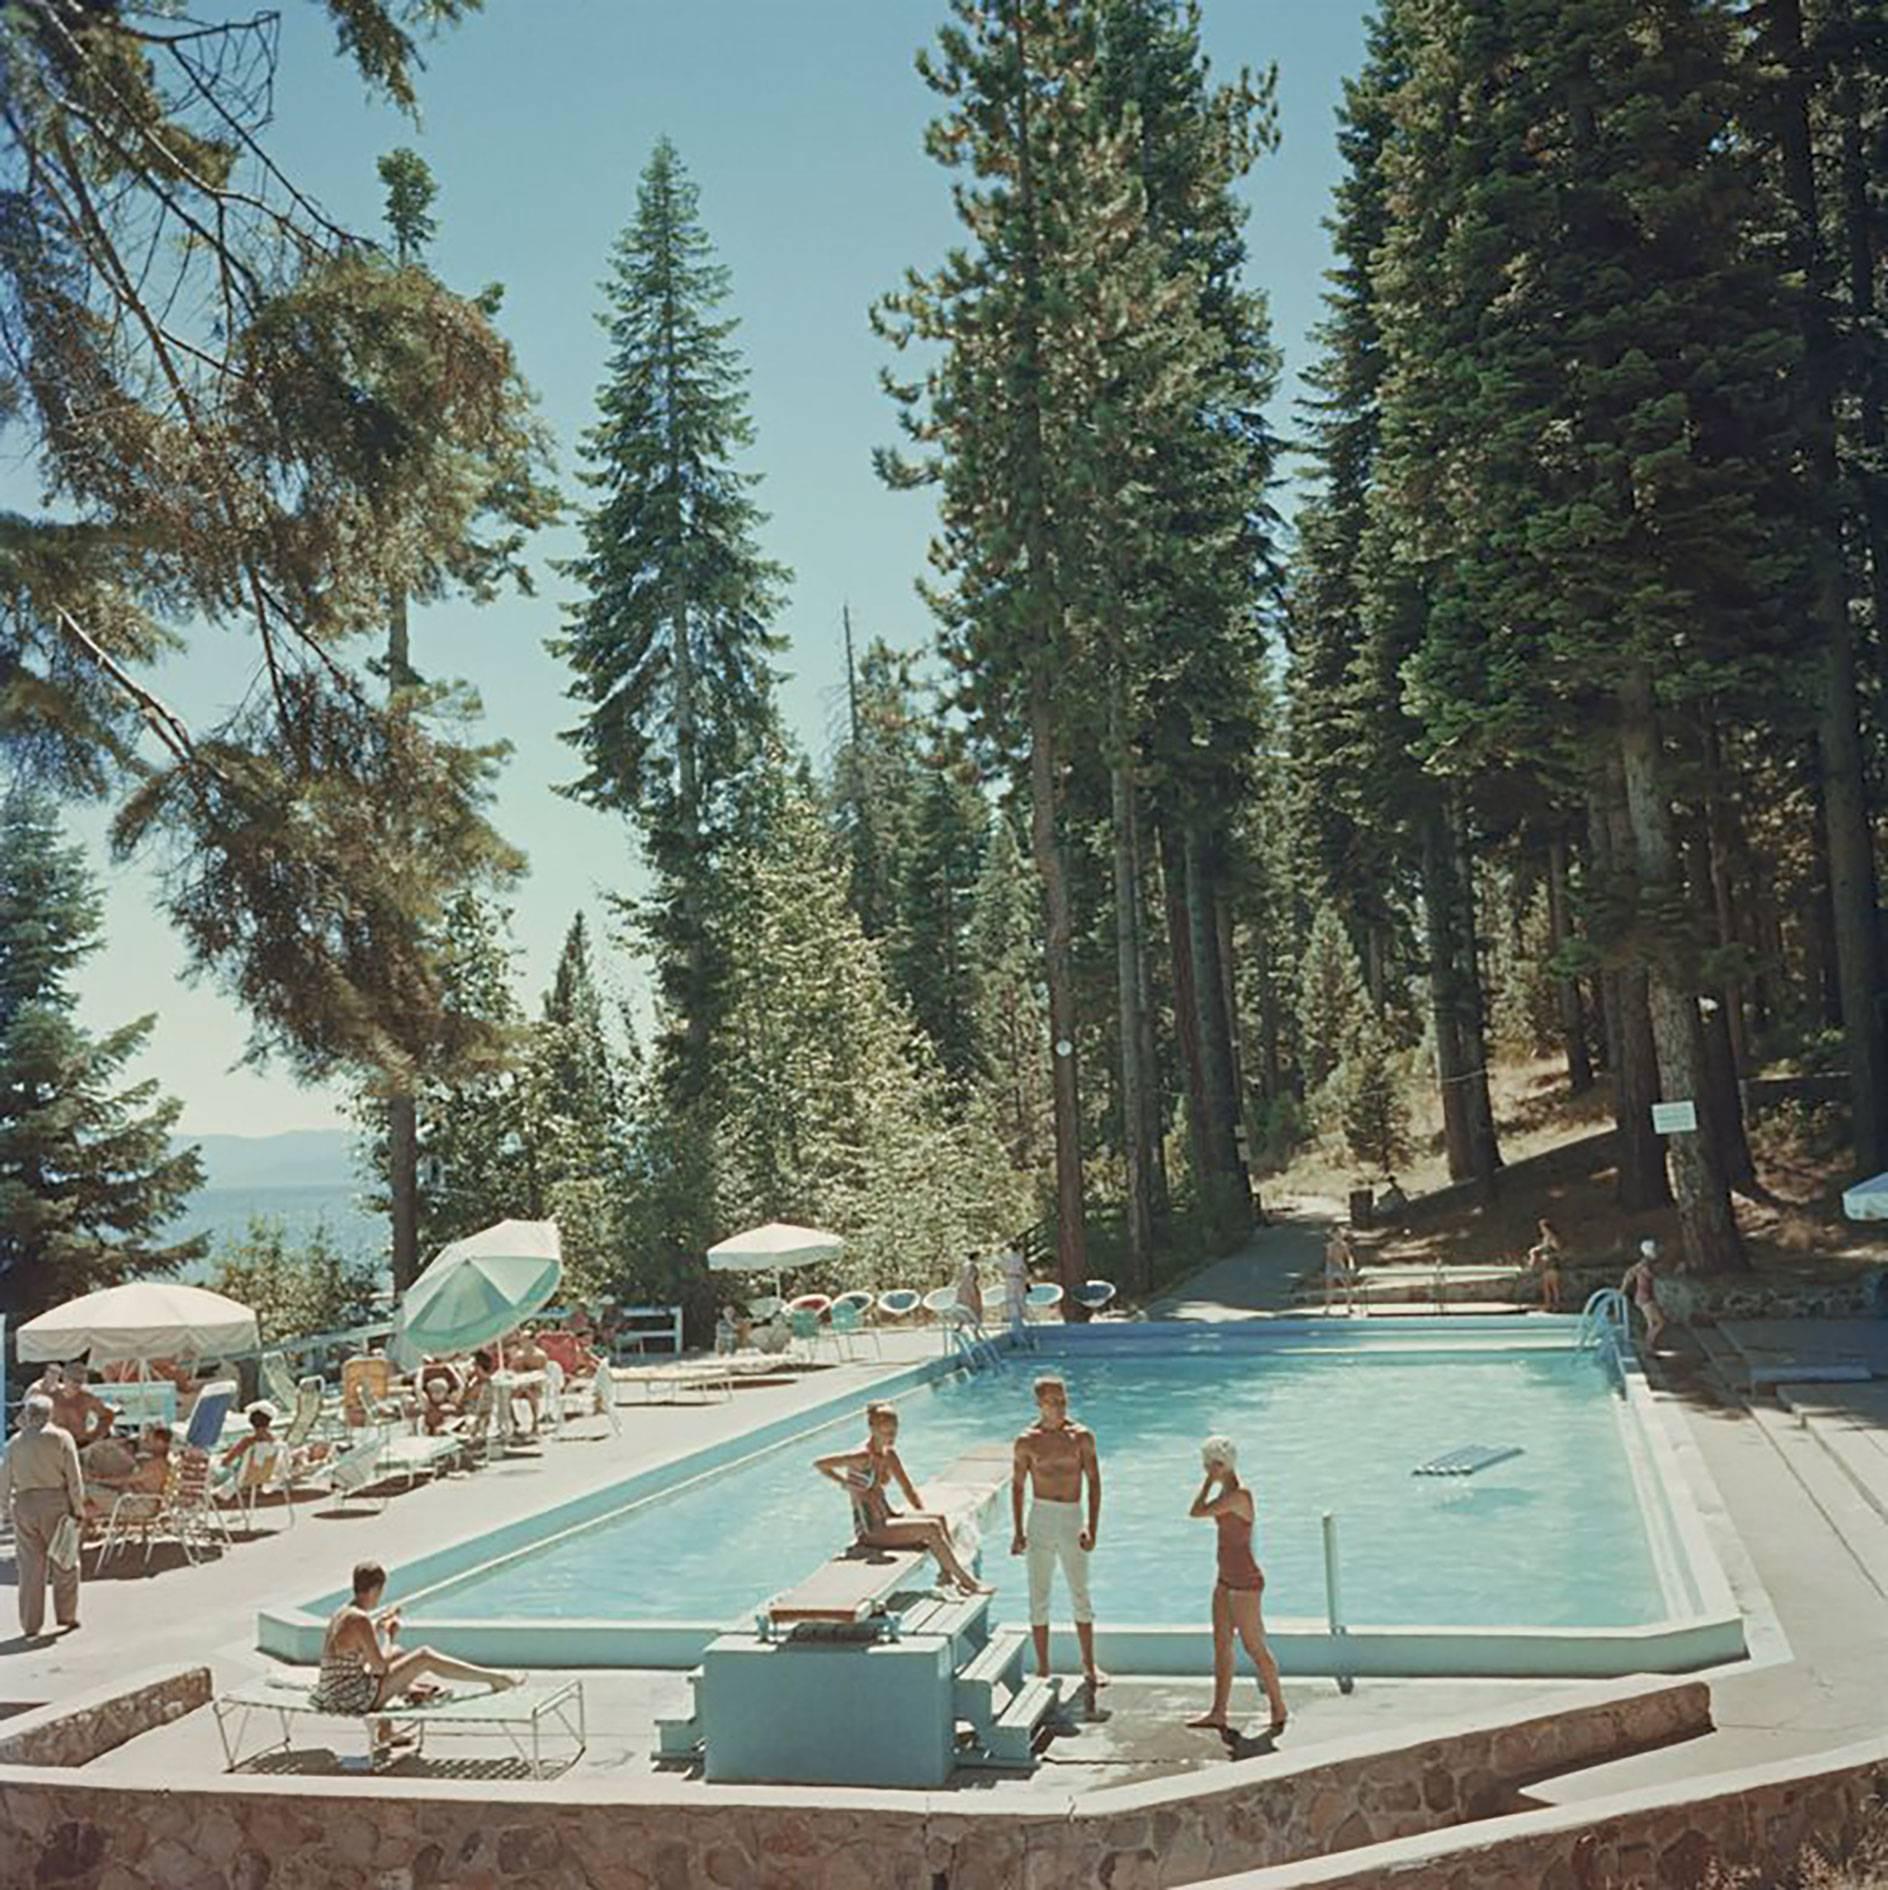 Bathers by a pool at the Tahoe Tavern on the shore of Lake Tahoe, California, 1959

Slim Aarons
Pool at Lake Tahoe
Chromogenic Lambda print
Slim Aarons Estate Edition
Complimentary dealer shipping to your framer, worldwide.

40 x 40 inches
$3950

30